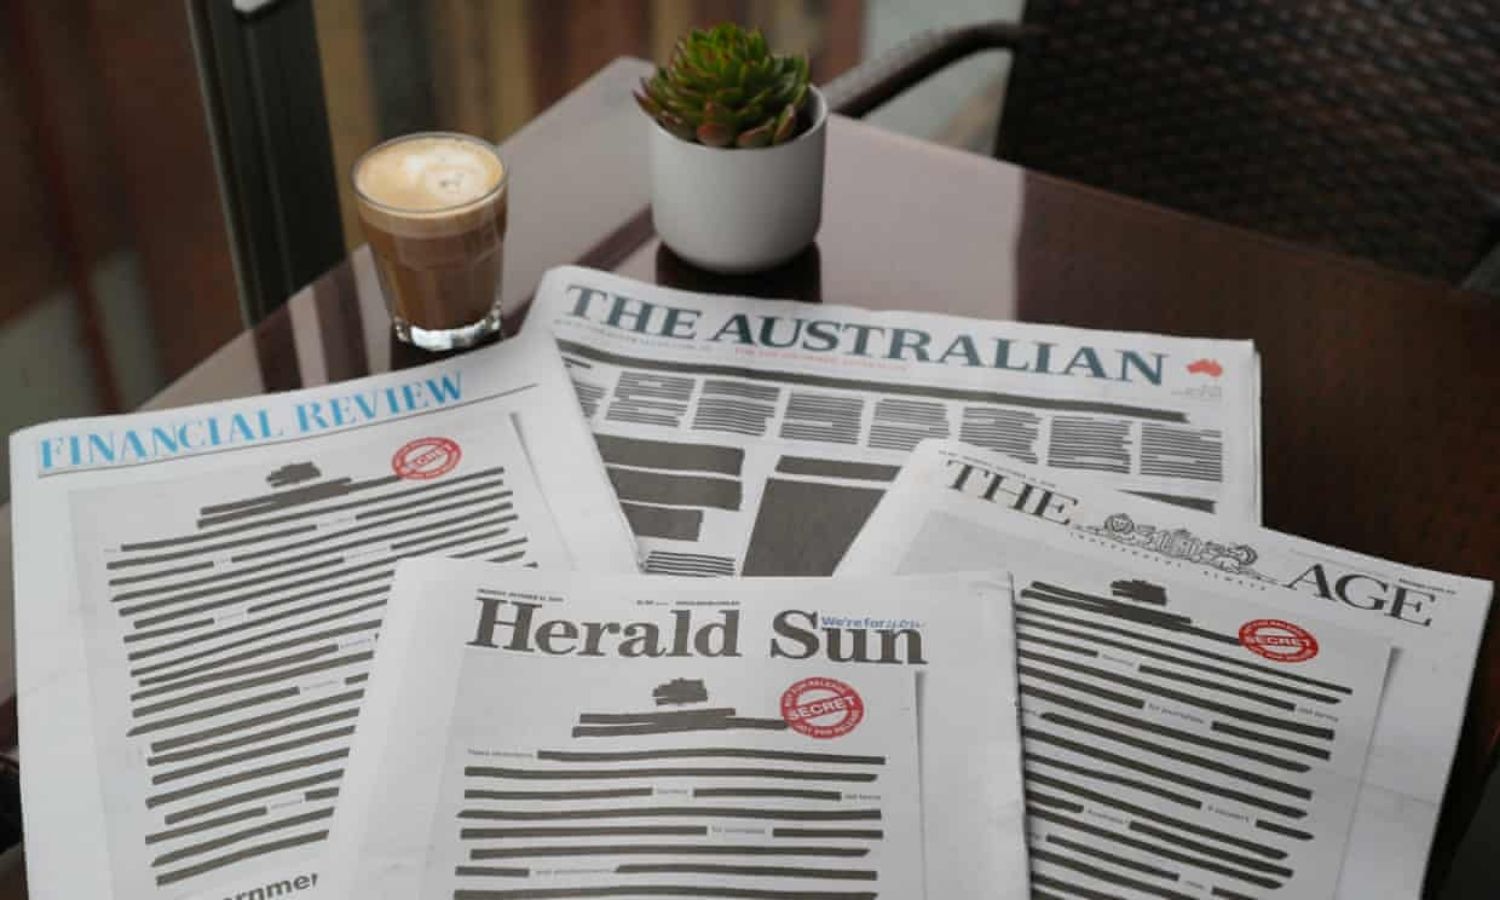 OTD in 2019: Major Australian newspapers blacked out their front pages in protest against press restrictions on printing whistleblower stories.